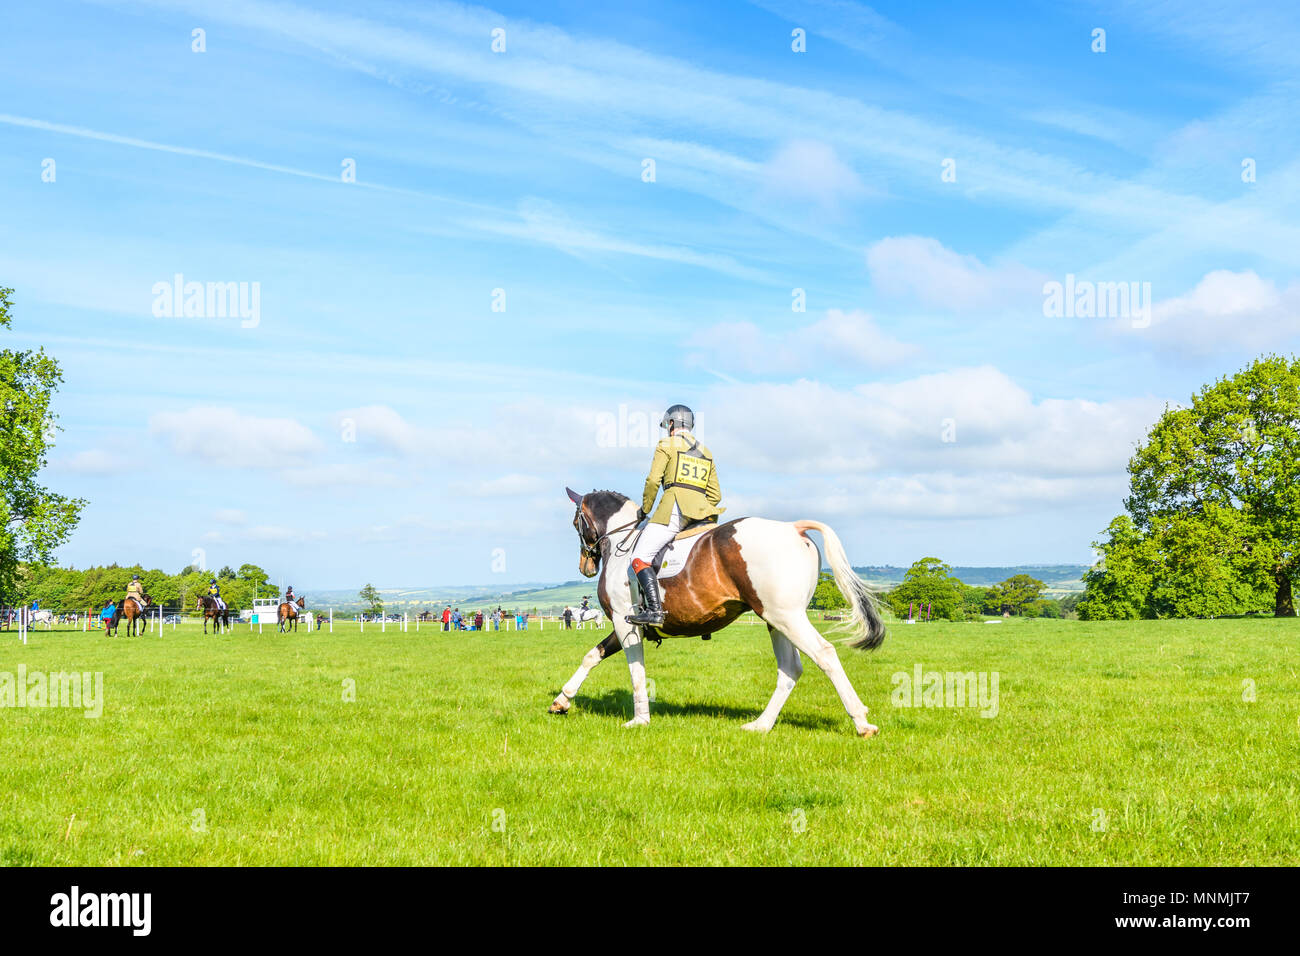 Corby, England. 18th May 2018. The horse Utrecht II  and rider Ben Willoughby take part in the dressage event during the international horse trials at the park of Rockingham Castle, Corby, England on 18 May 2018. Credit: Michael Foley/Alamy Live News Stock Photo